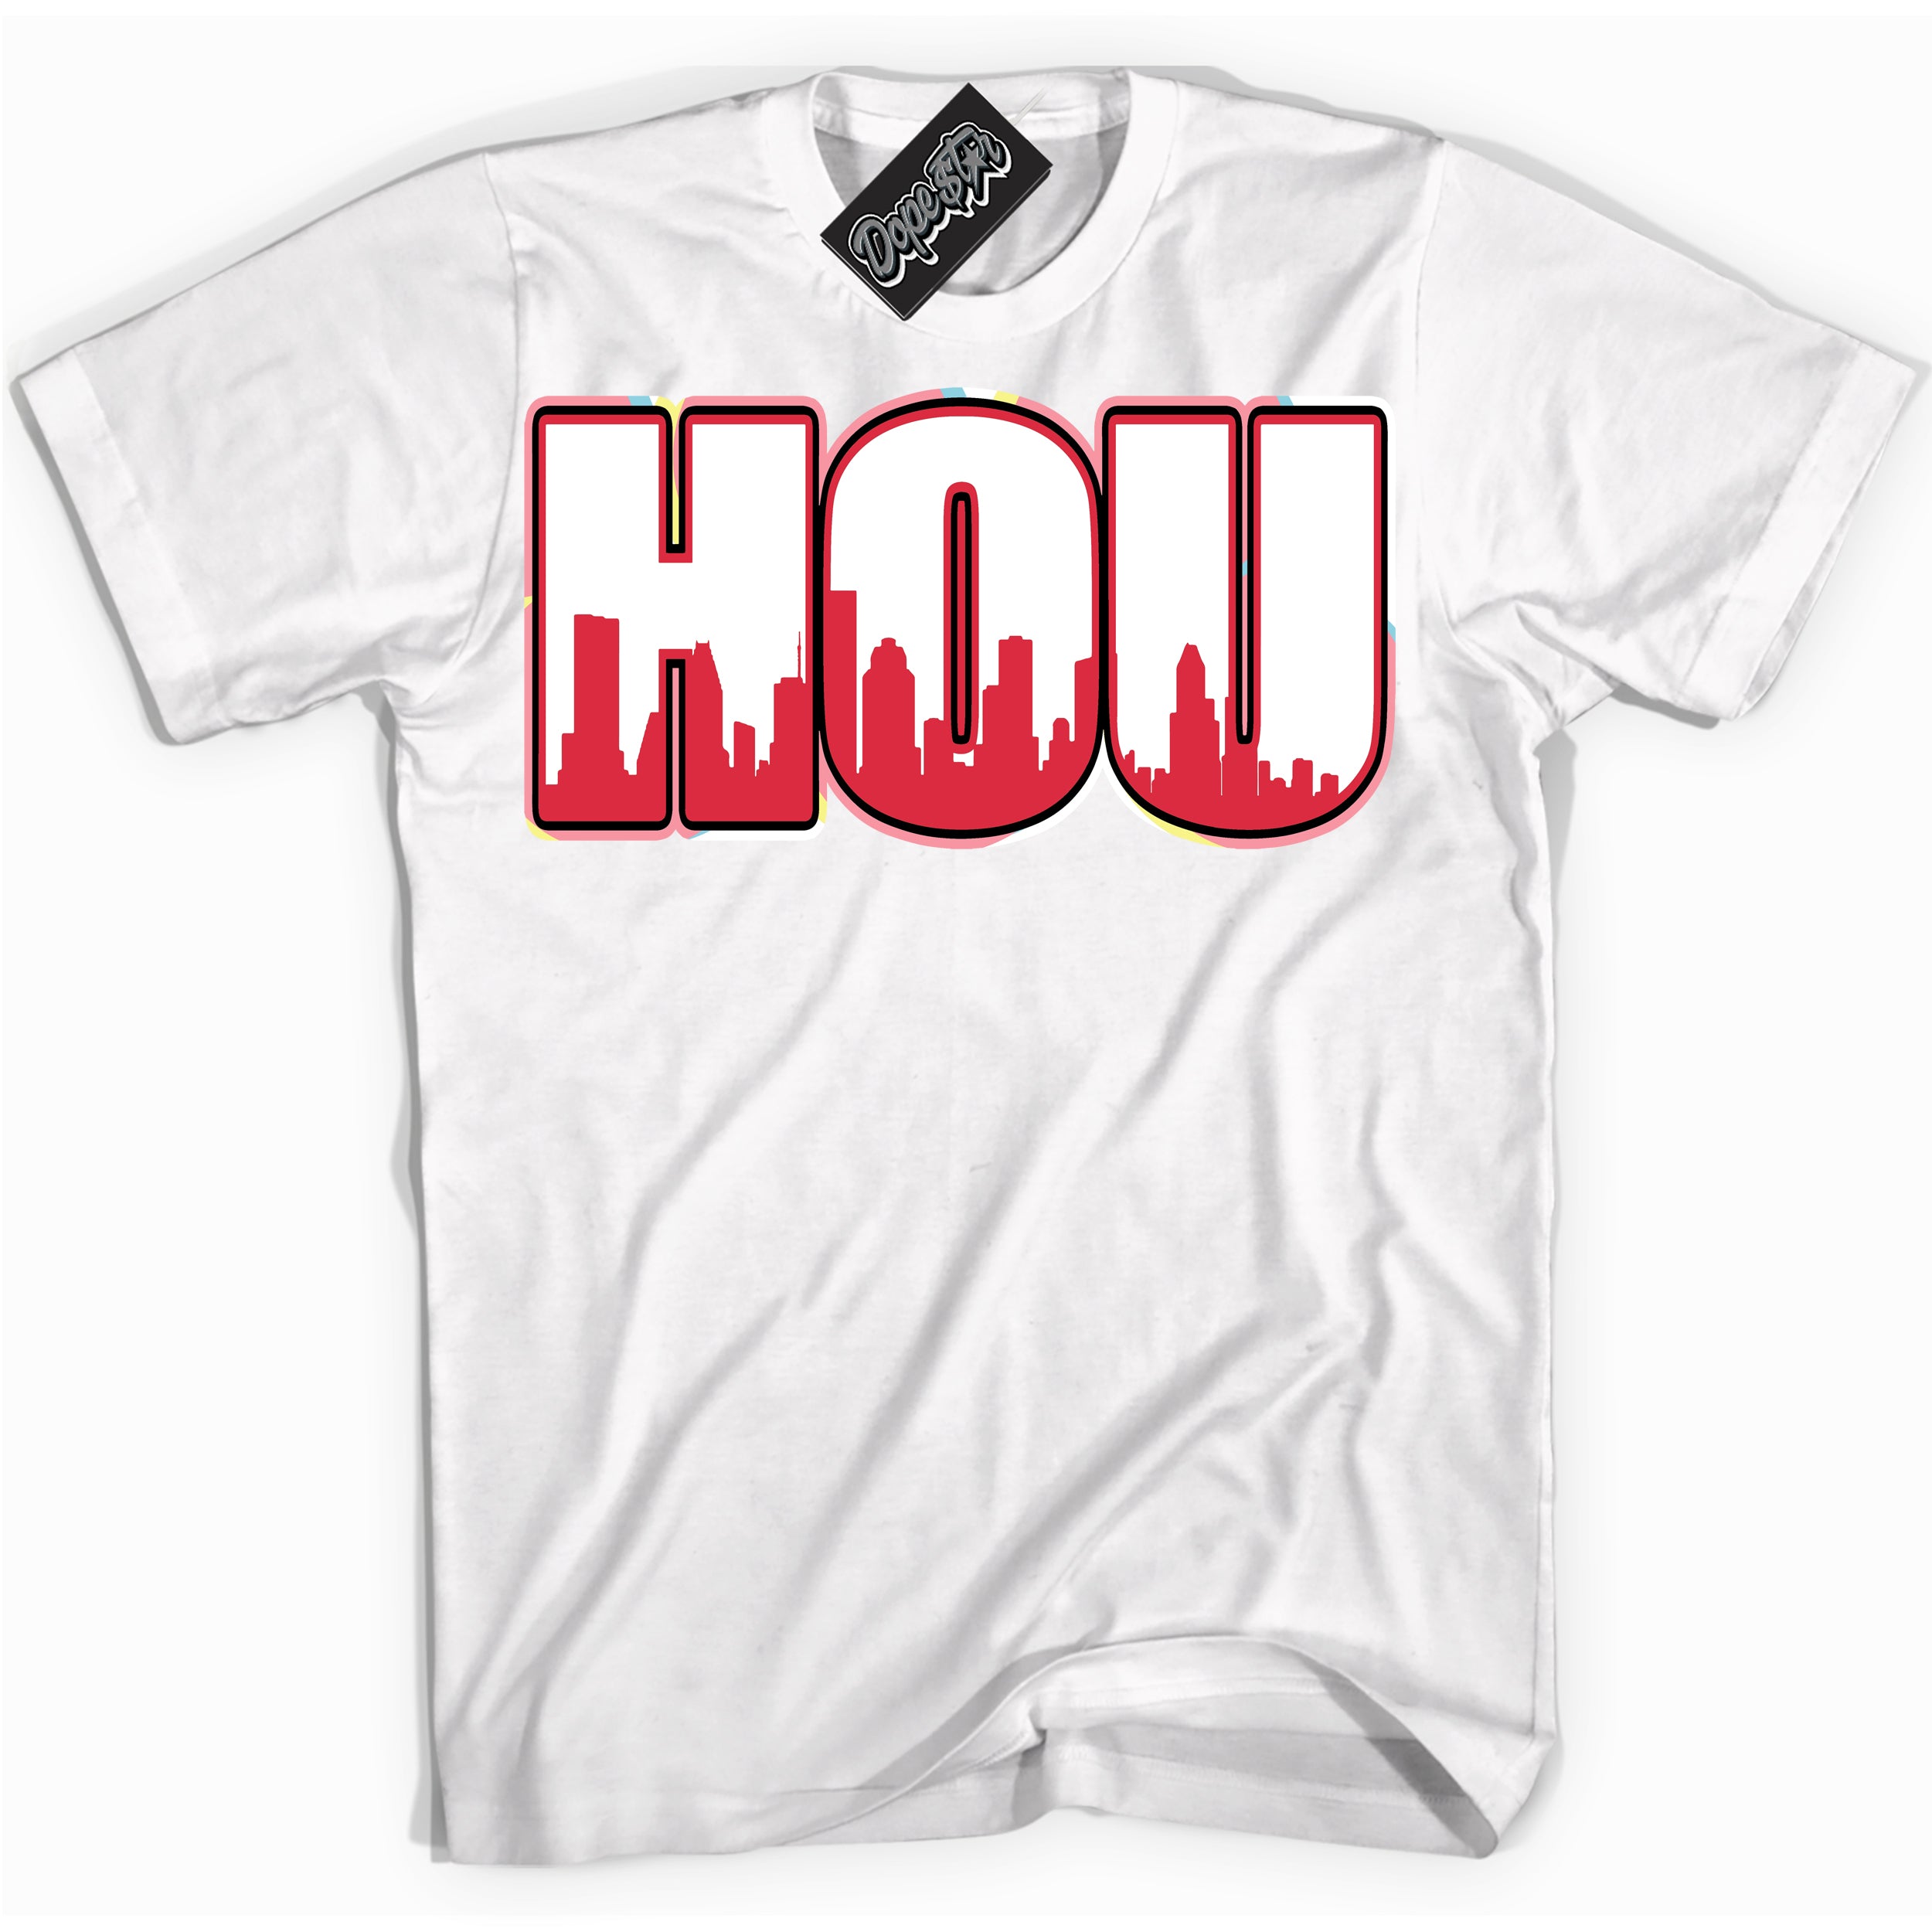 Cool White graphic tee with “ Houston ” design, that perfectly matches Spider-Verse 1s sneakers 